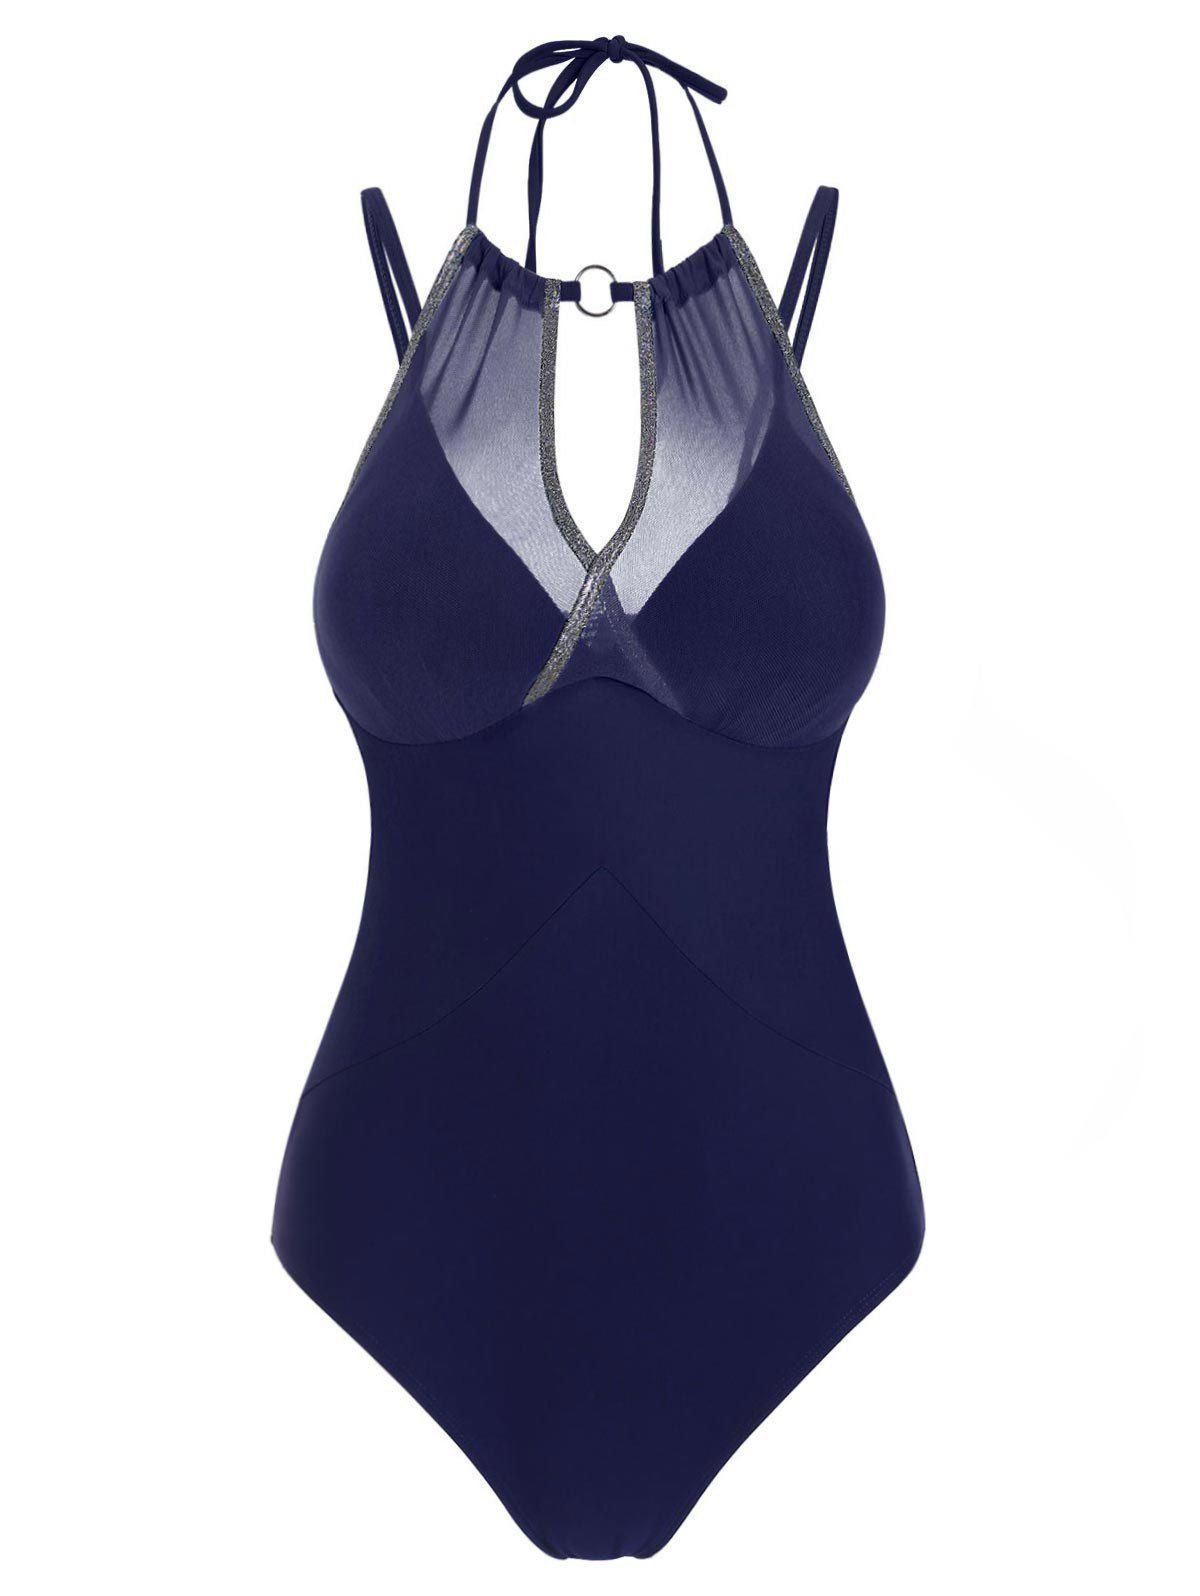 Mesh Overlay Sparkly Push Up One-piece Swimsuit - DEEP BLUE 3XL